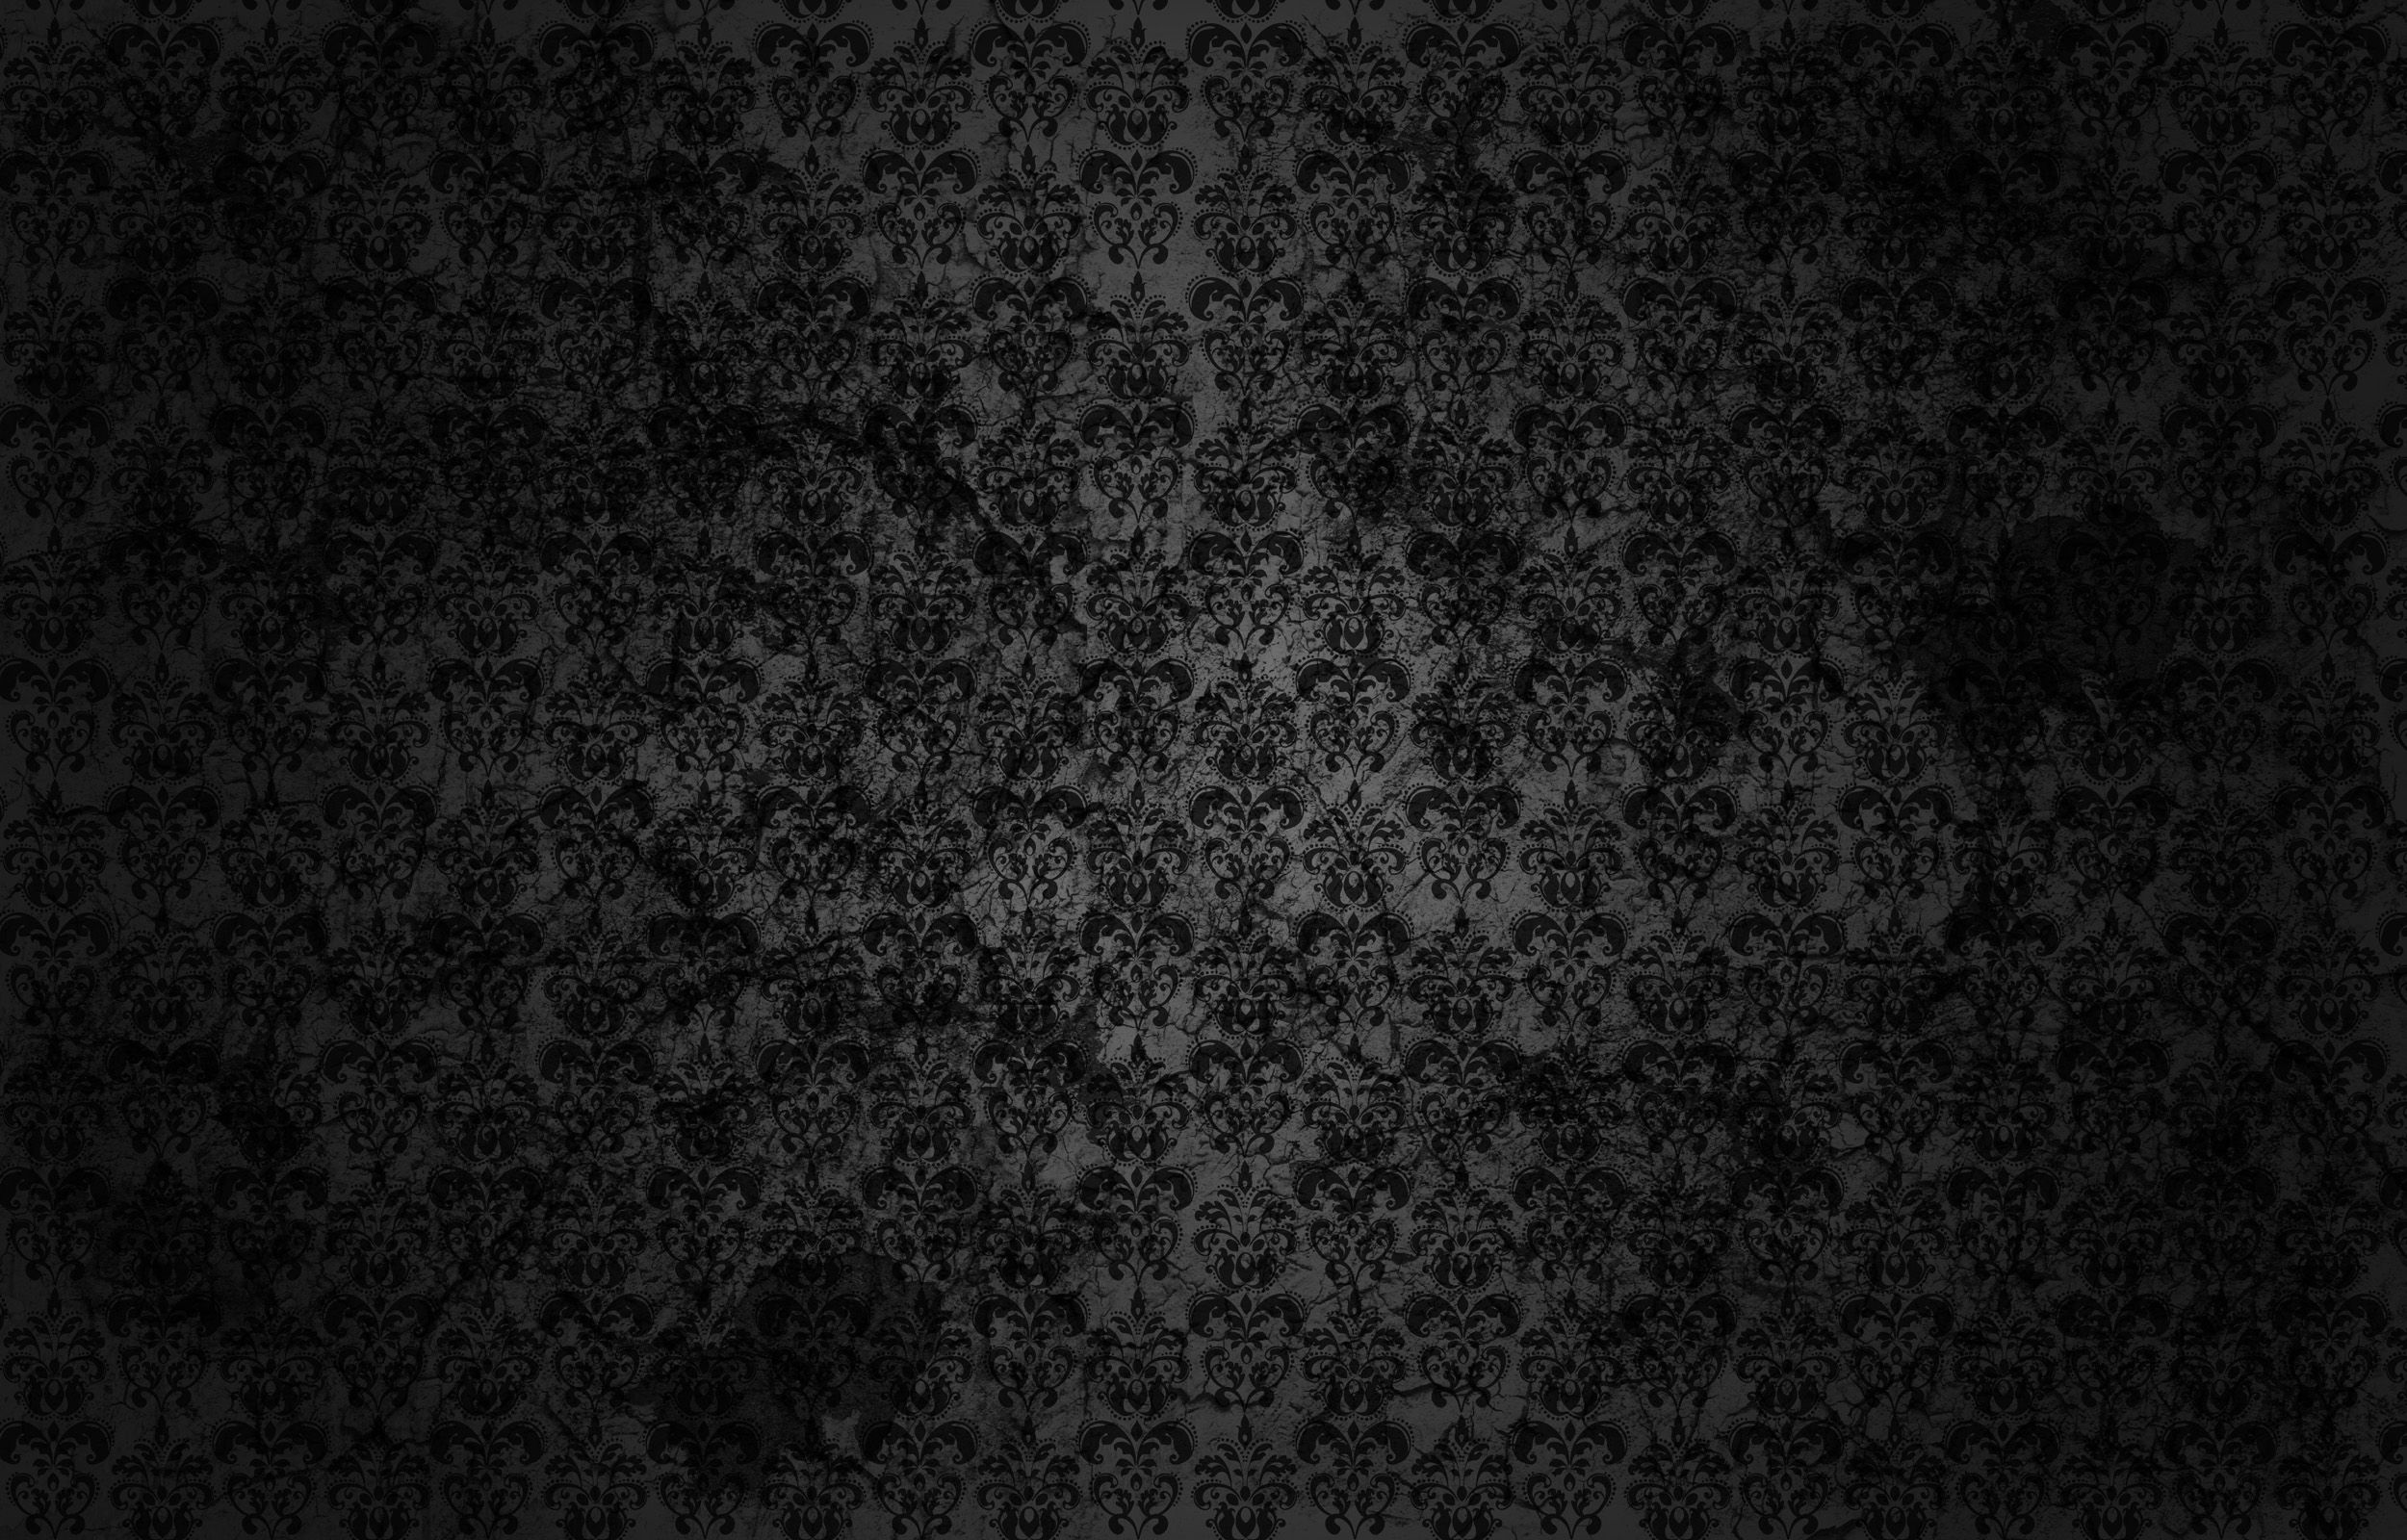 Grunge Background Wallpaper With Image Black